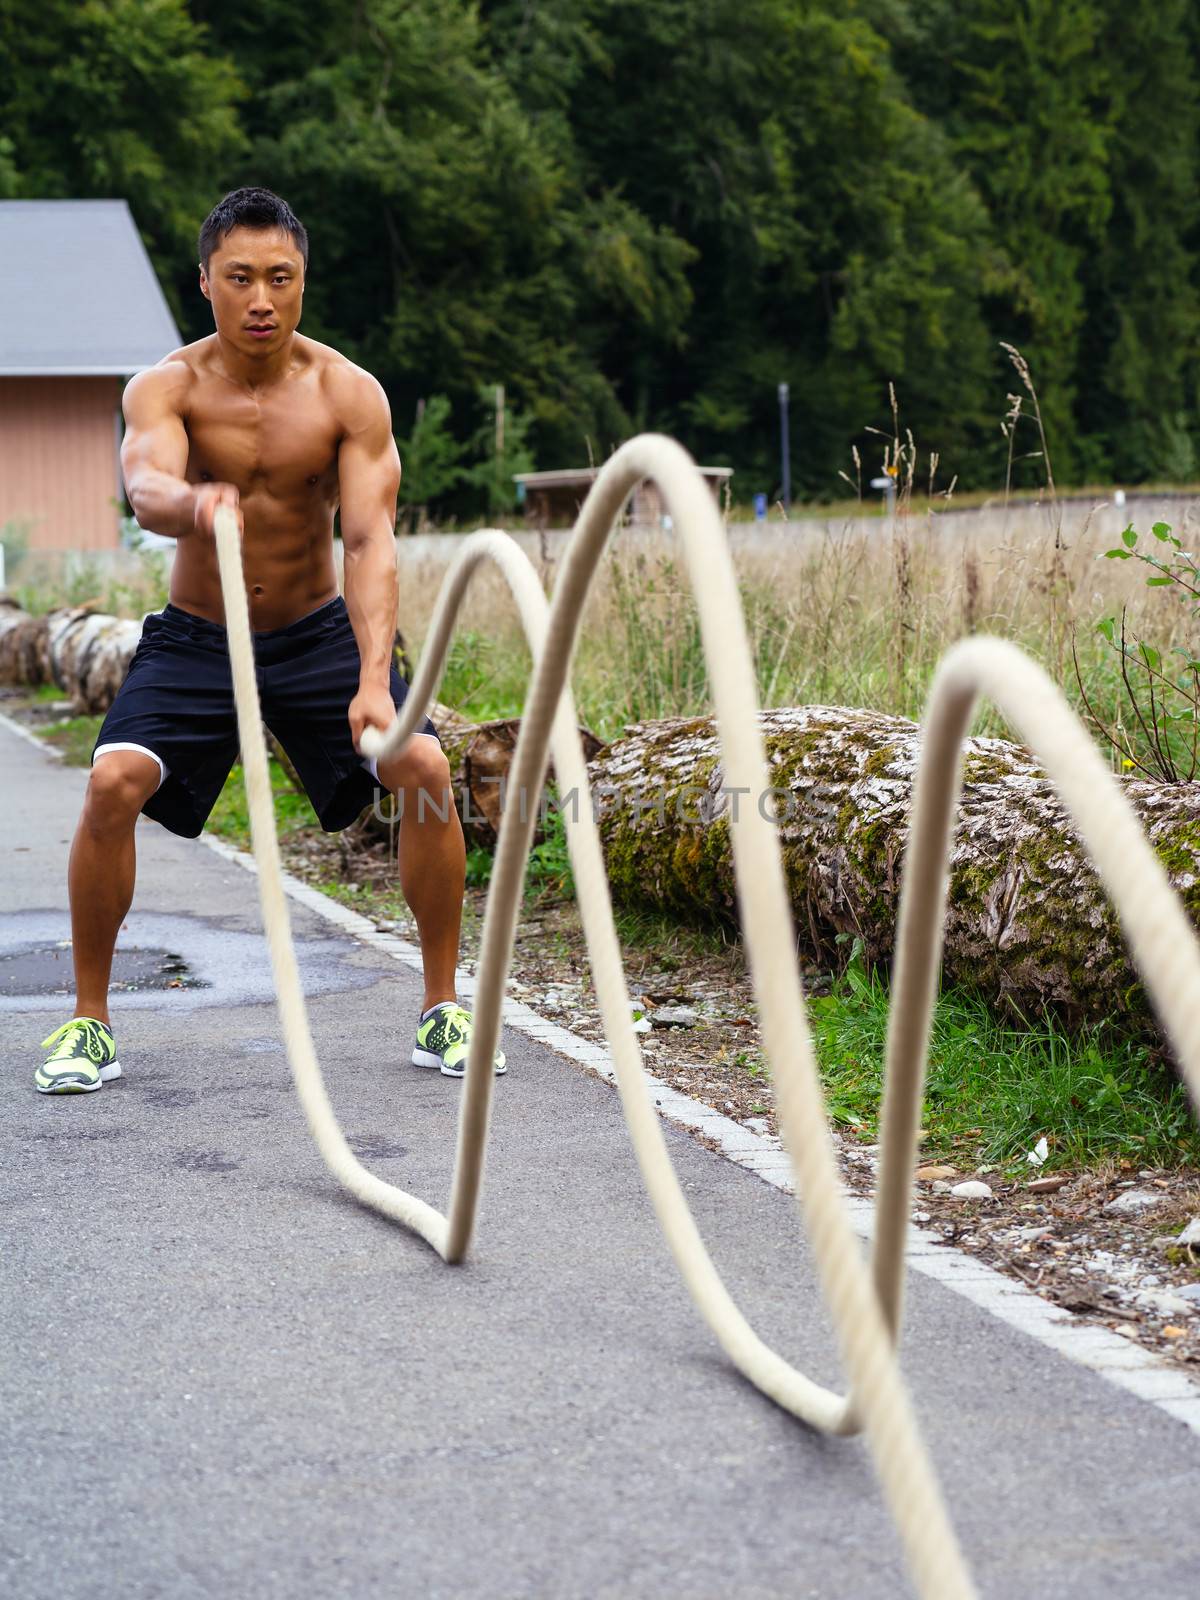 Photo of a muscular Asian man outdoors working out with training ropes.
